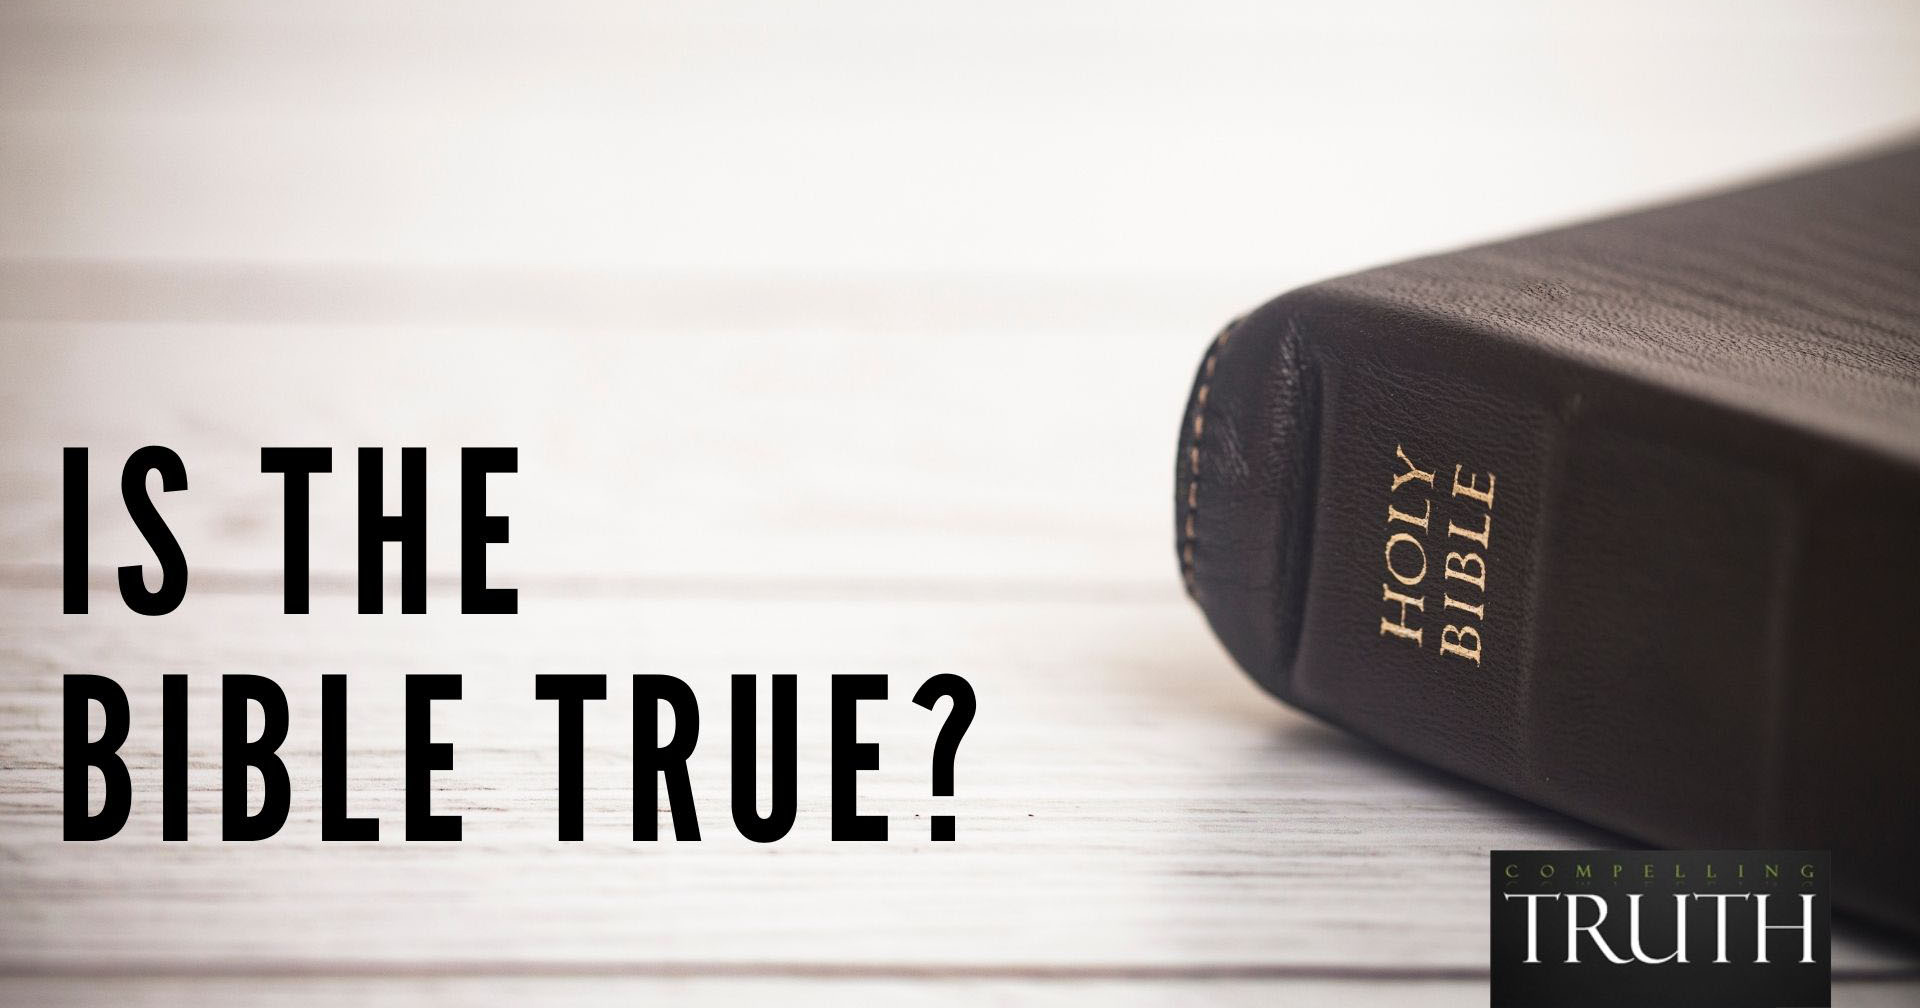 Is the Bible true?